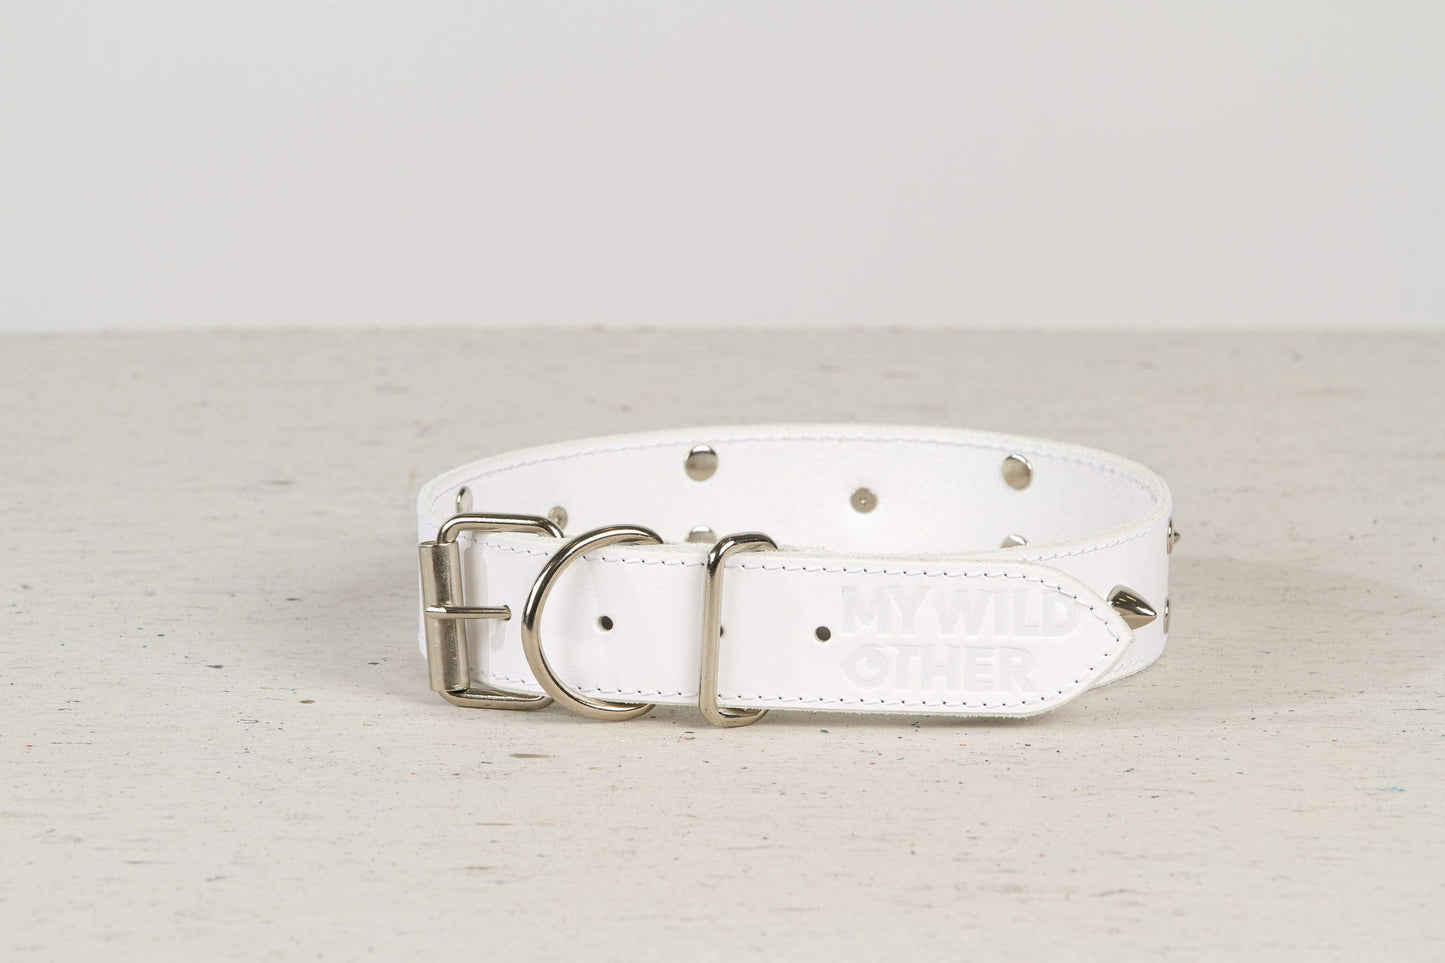 Handmade white leather STUDDED dog collar - European handmade dog accessories by My Wild Other